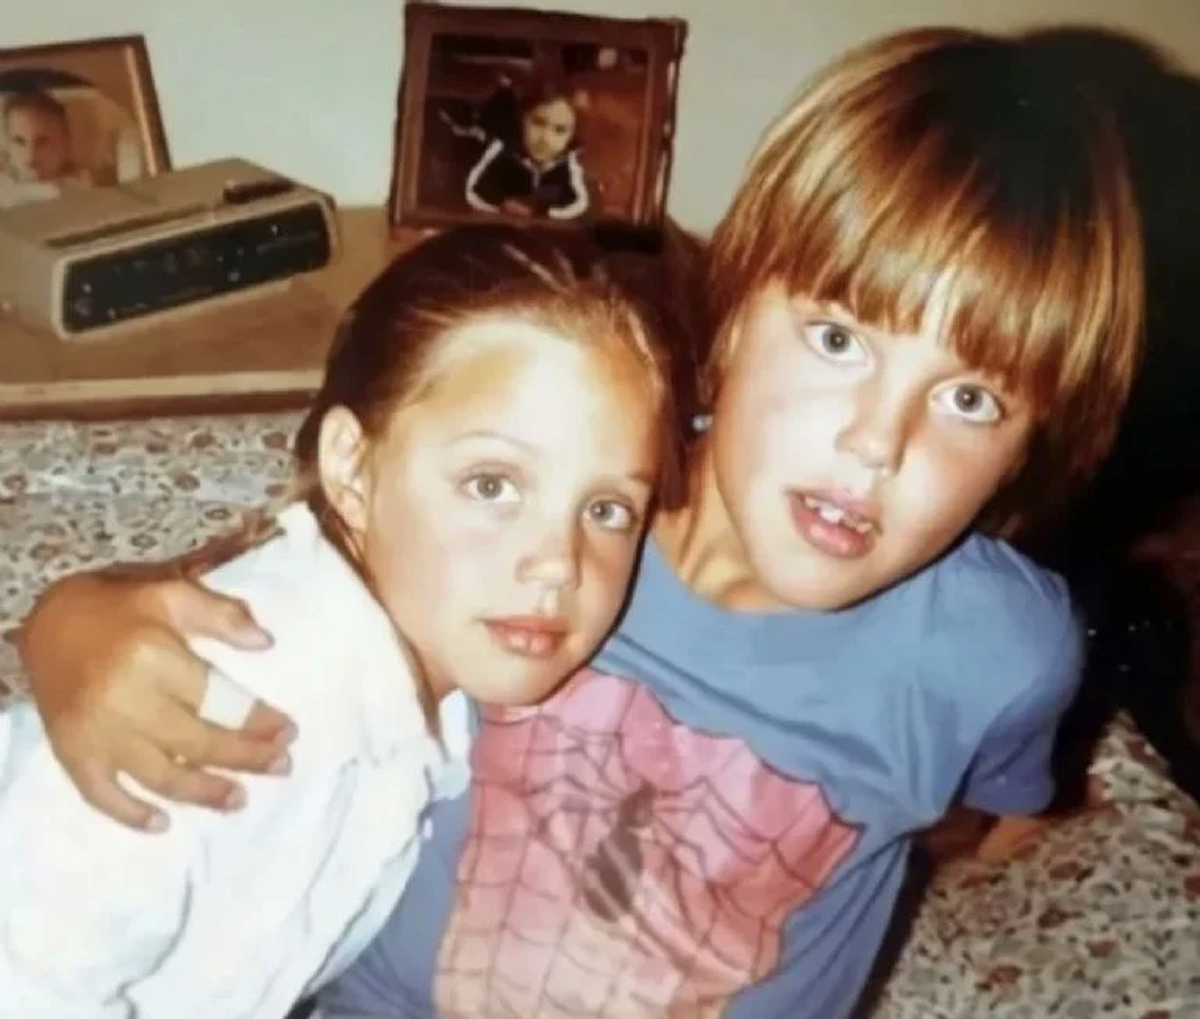 Angelina Jolie and her older brother James Haven as children.